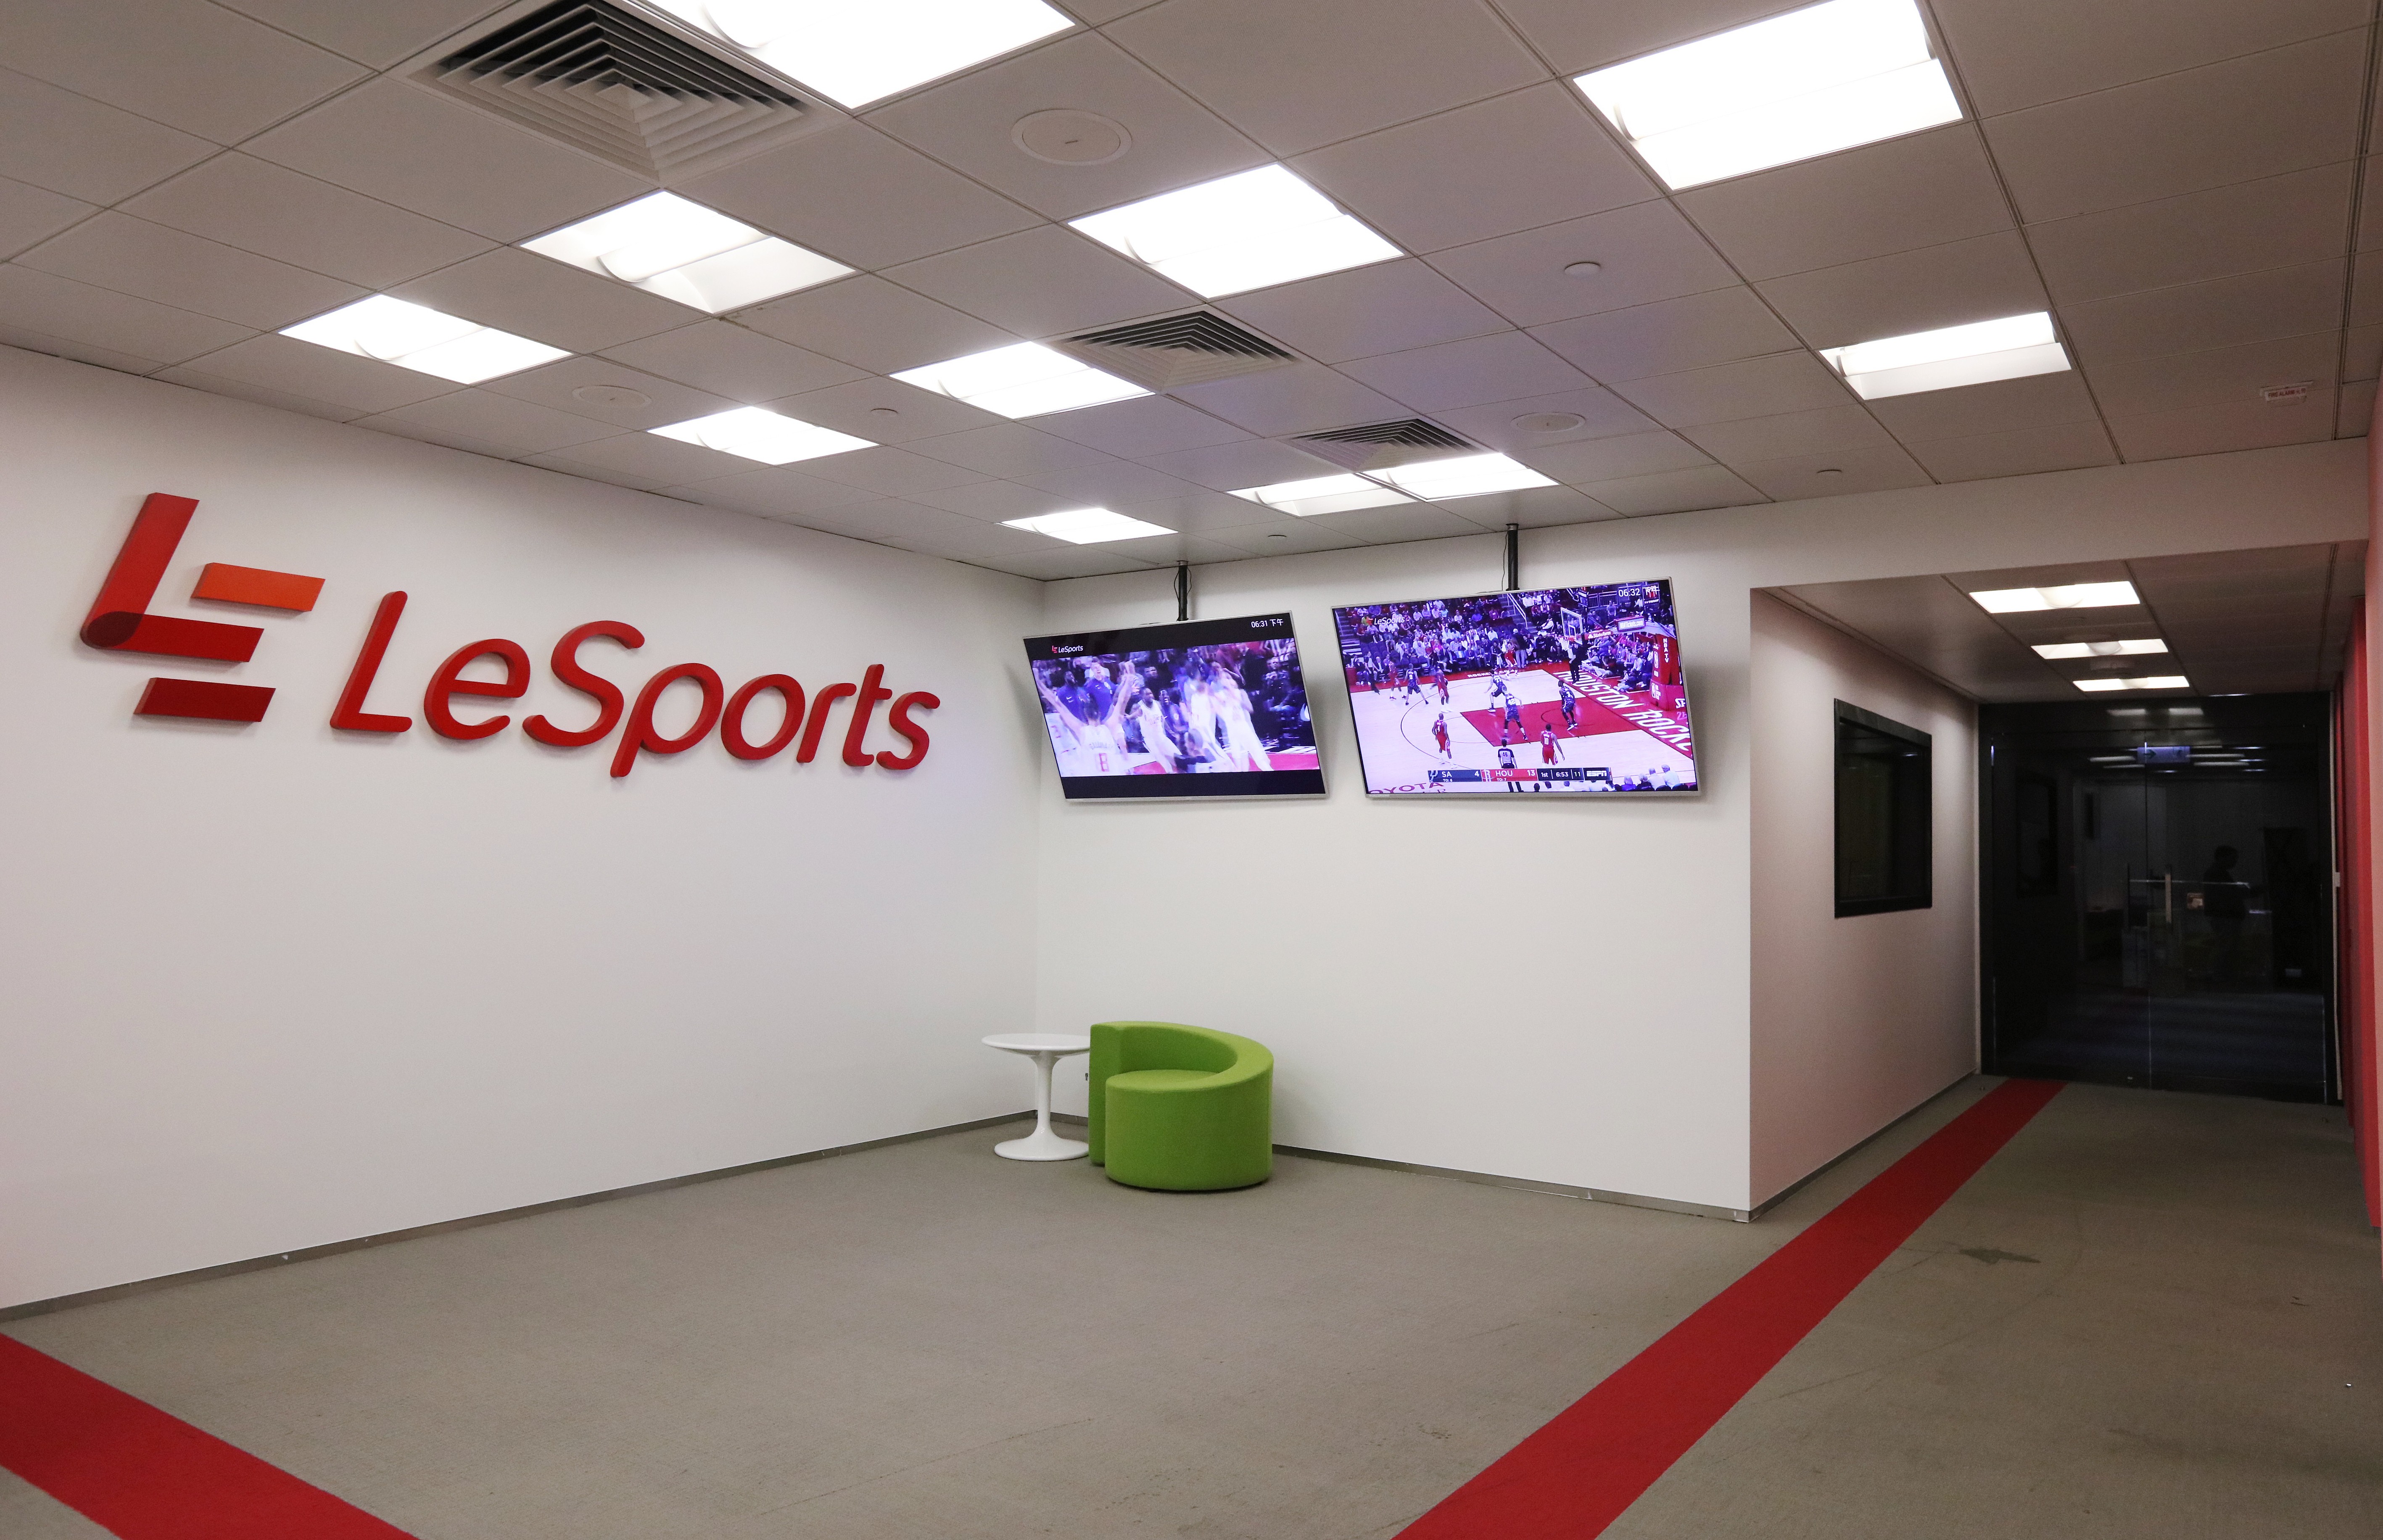 The LeSports office in Tsuen Wan had about 100 staff members as of Wednesday. Photo: Felix Wong